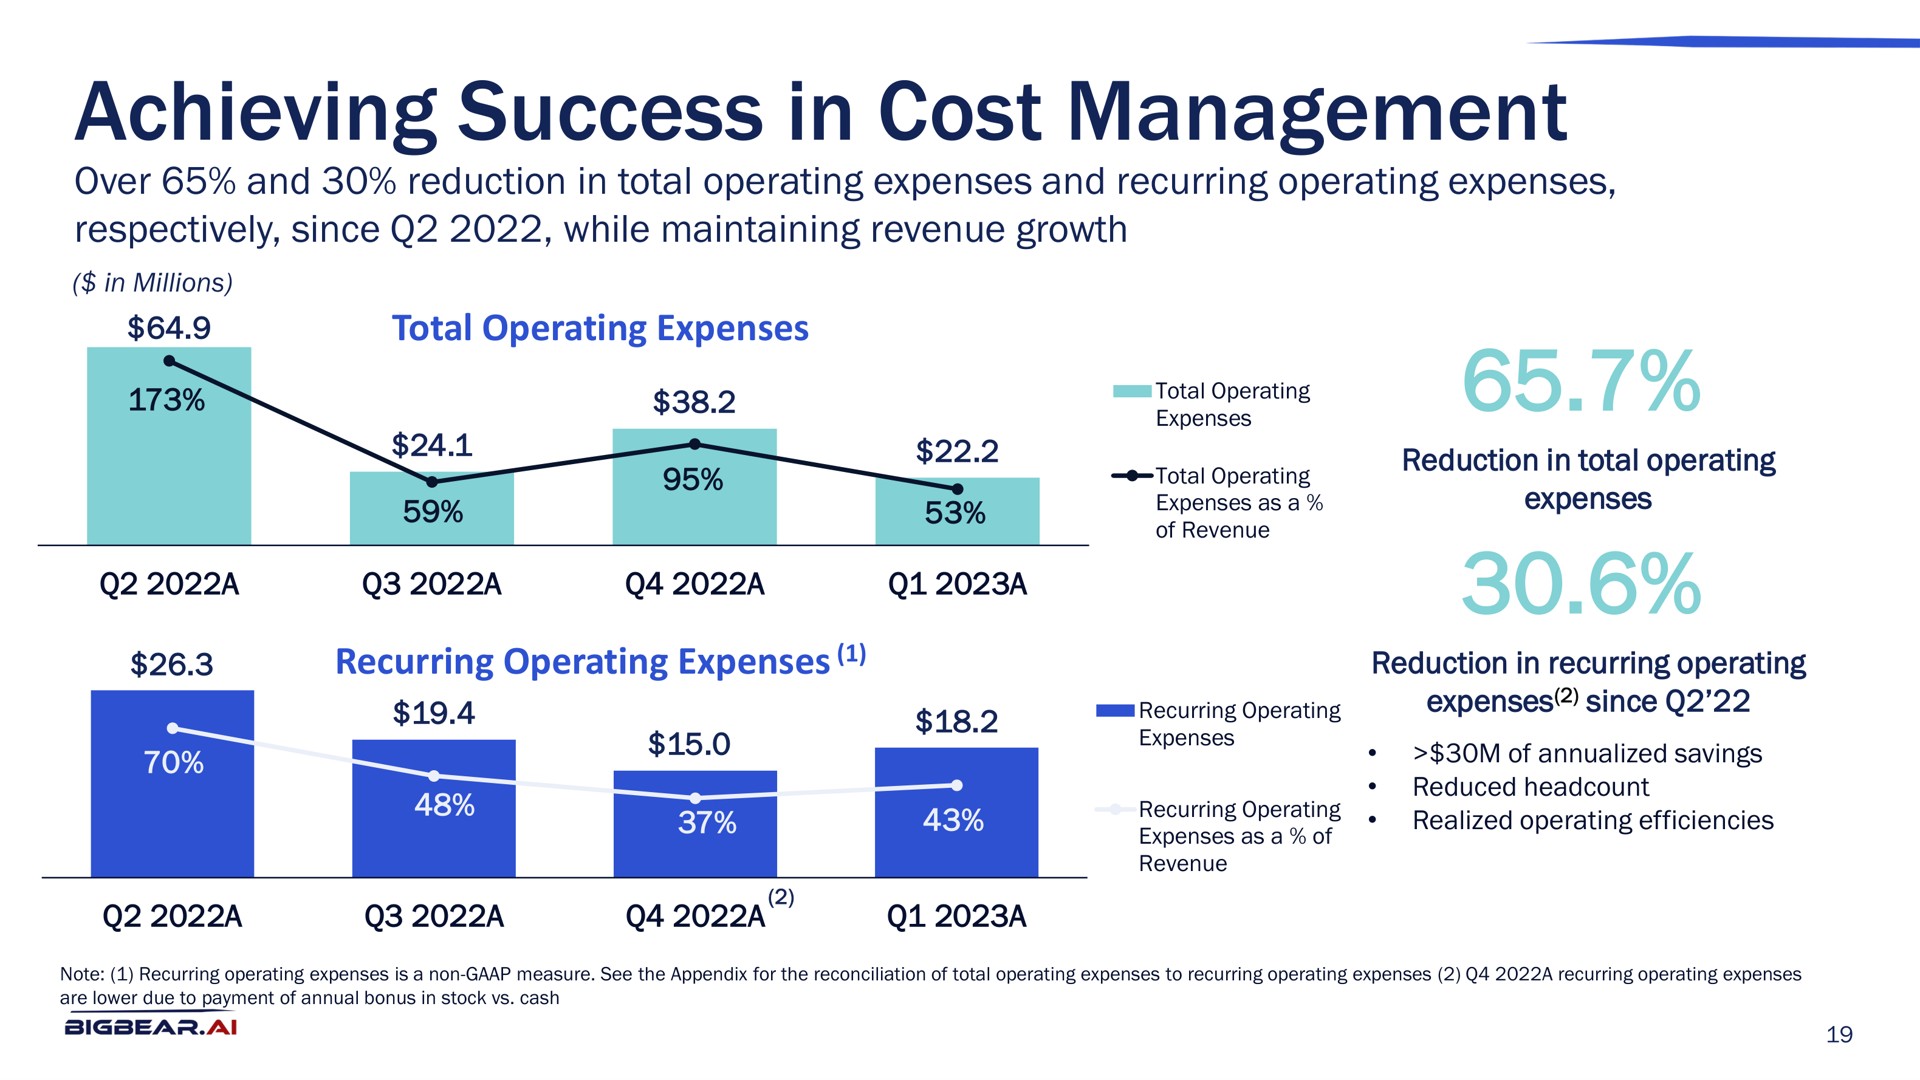 achieving success in cost management | Bigbear AI